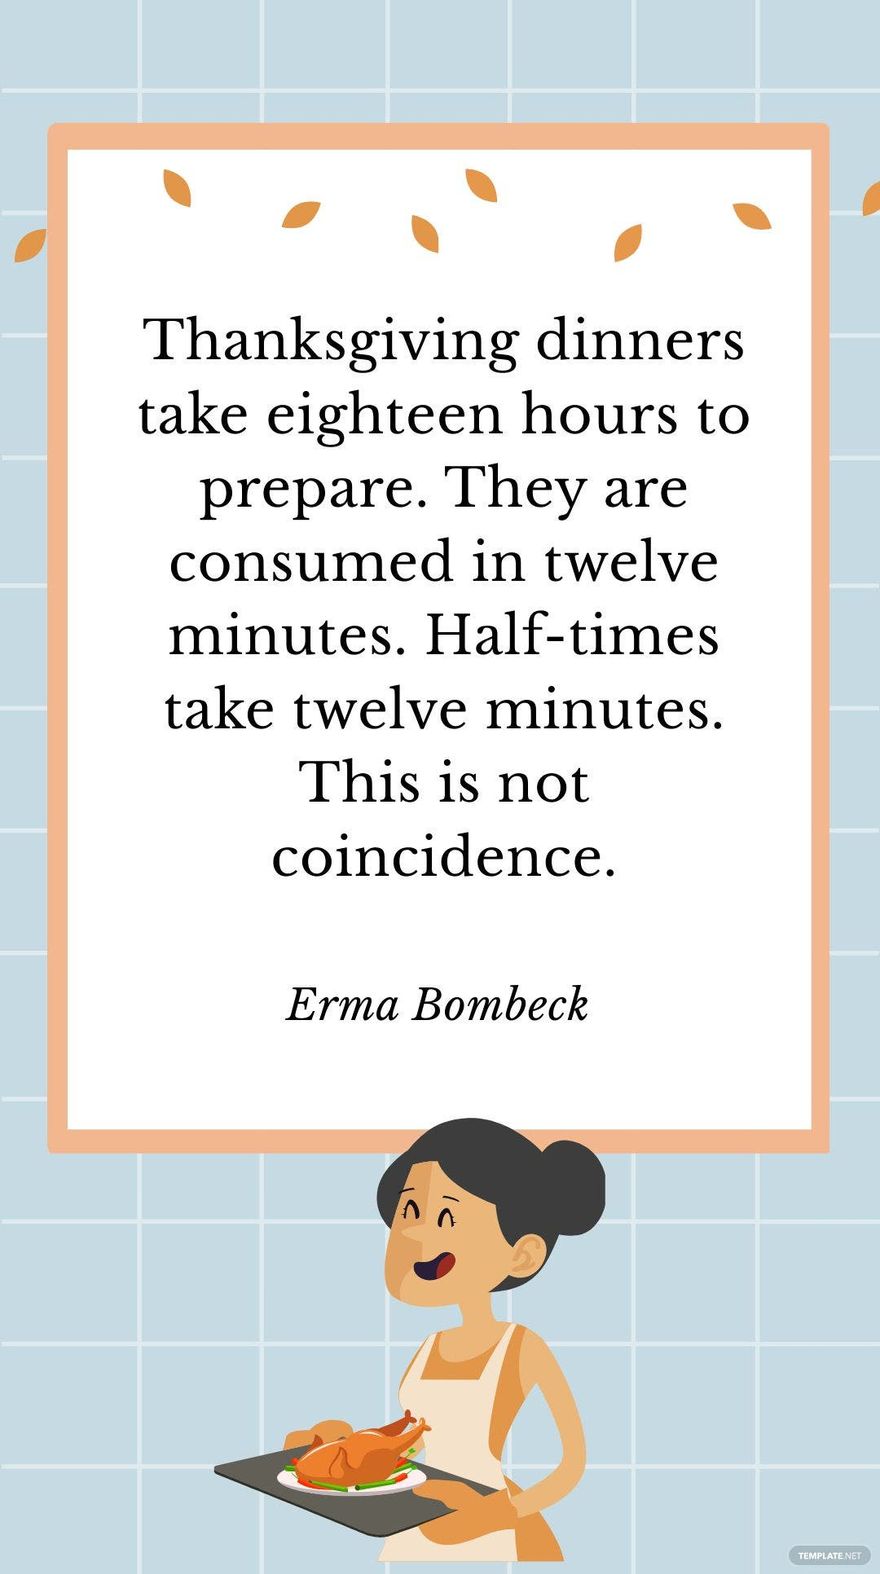 Free Erma Bombeck - Thanksgiving dinners take eighteen hours to prepare. They are consumed in twelve minutes. Half-times take twelve minutes. This is not coincidence.